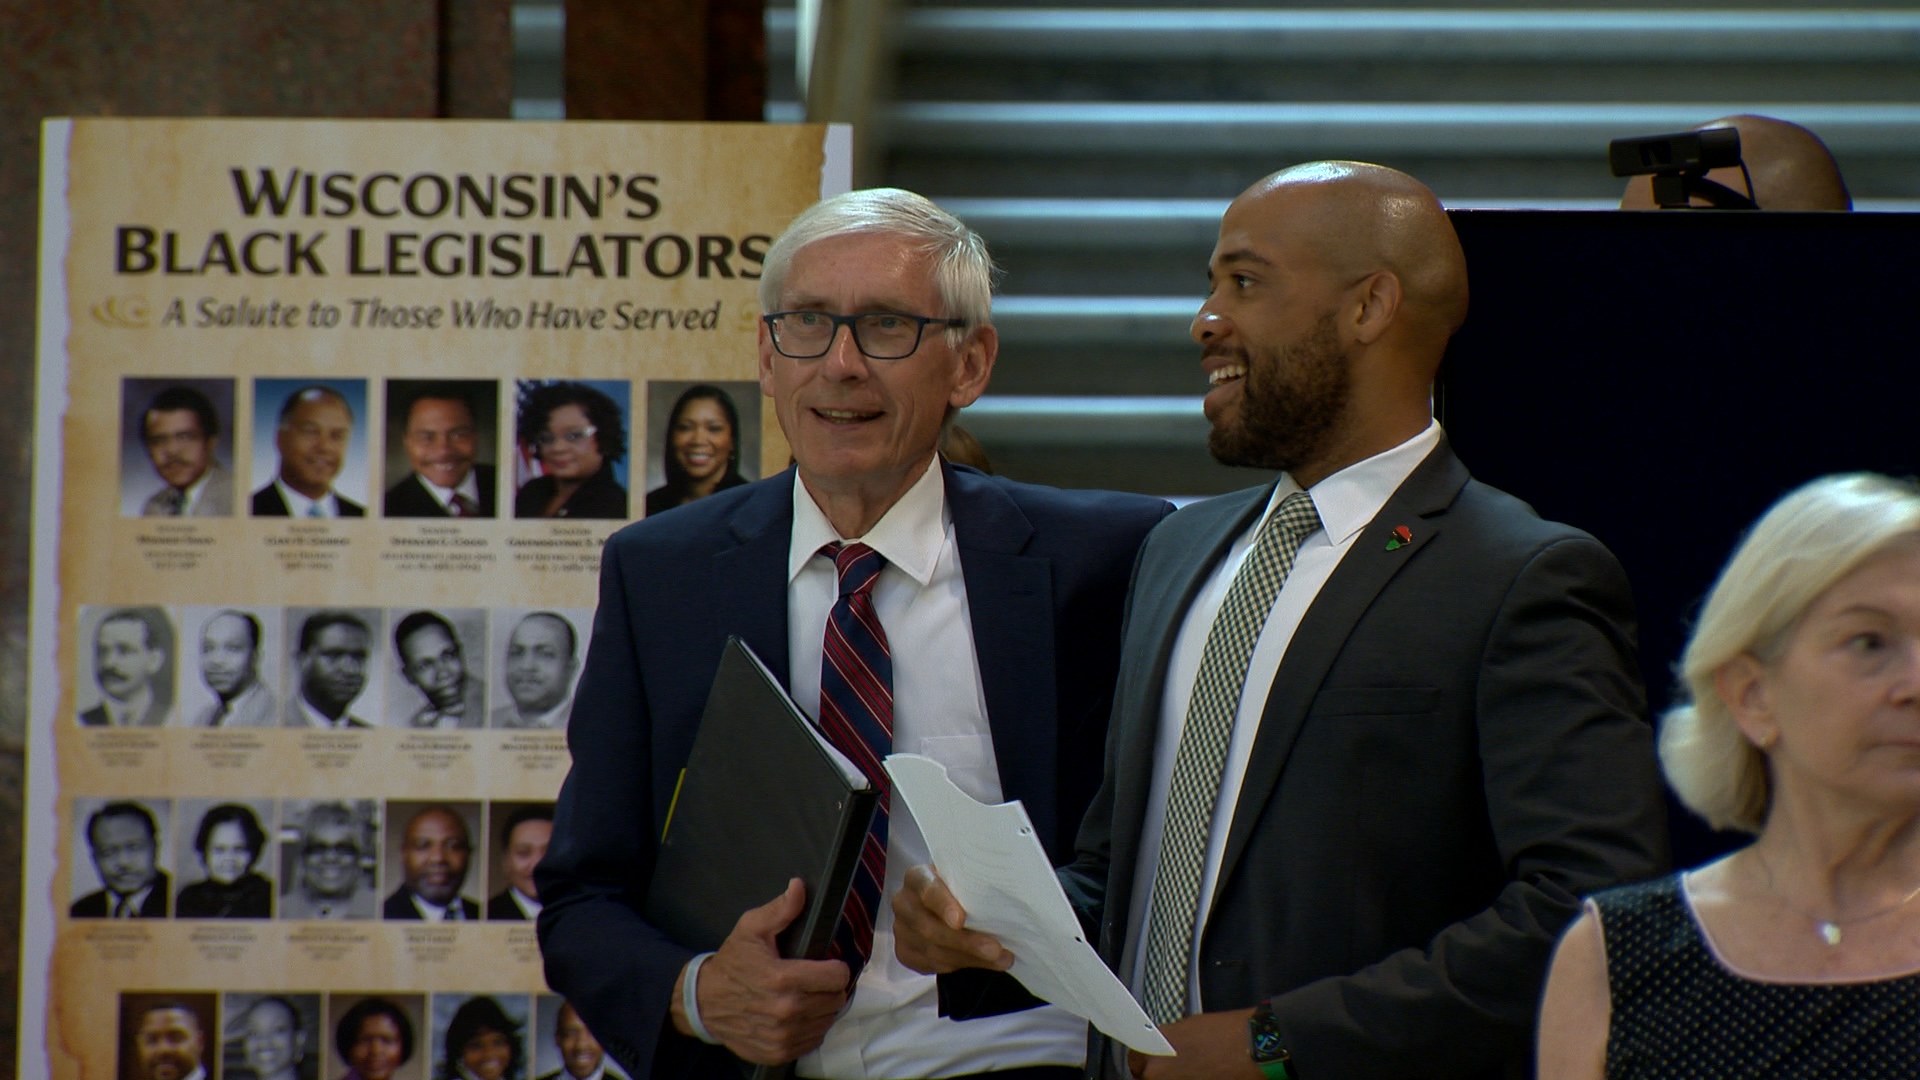 Tony Evers and Mandela Barnes stand next to each other inside the Wisconsin Capitol